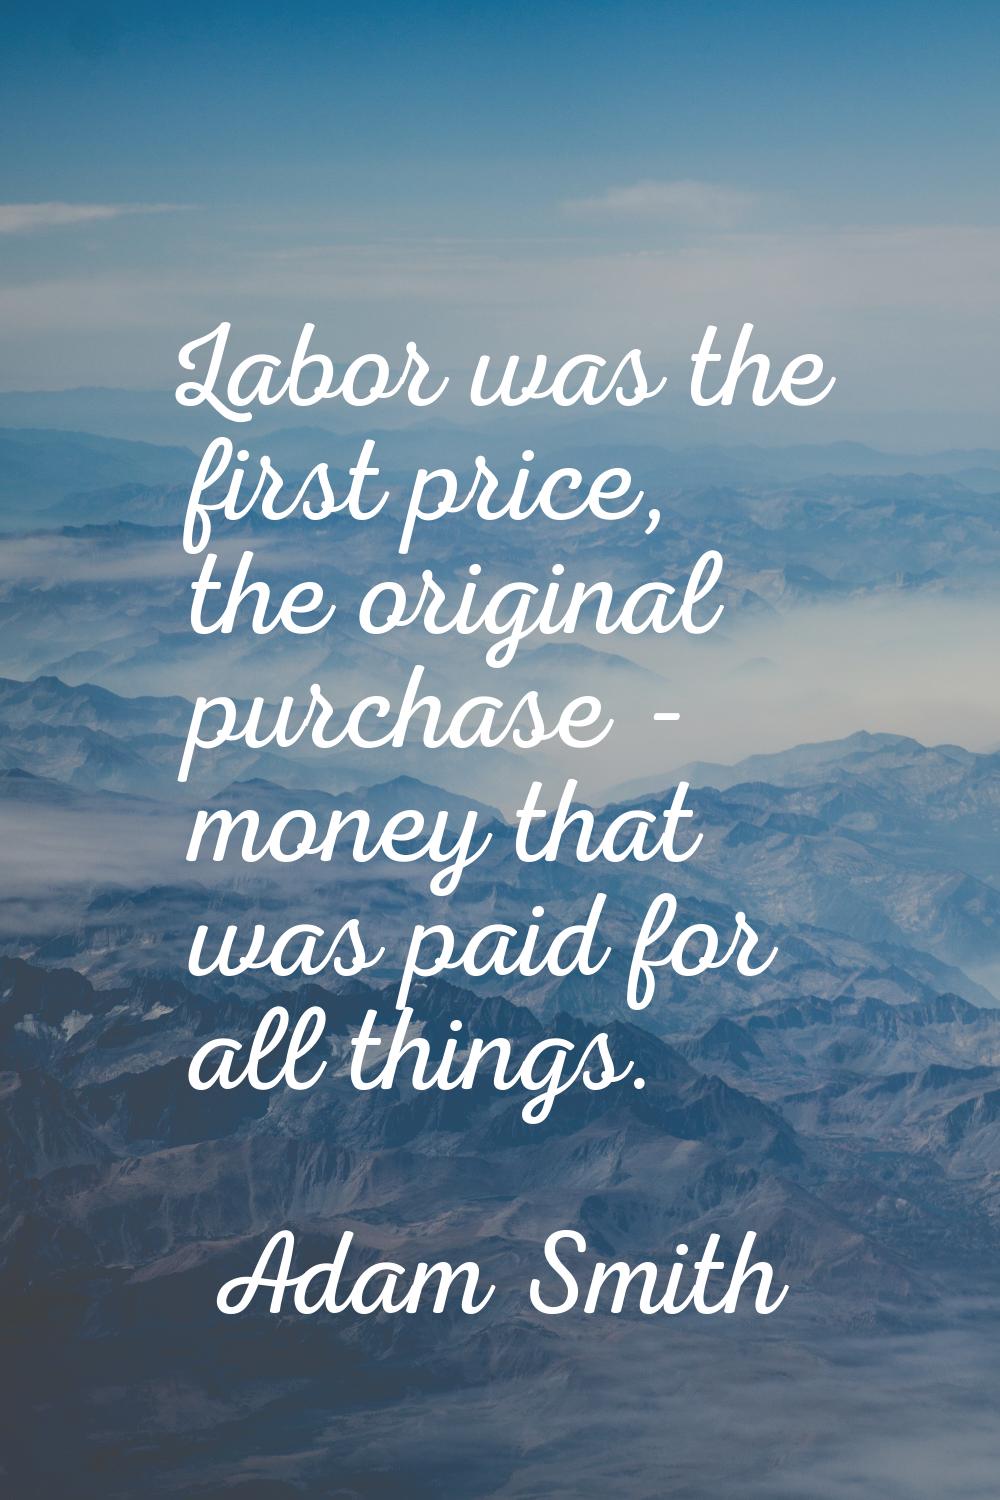 Labor was the first price, the original purchase - money that was paid for all things.